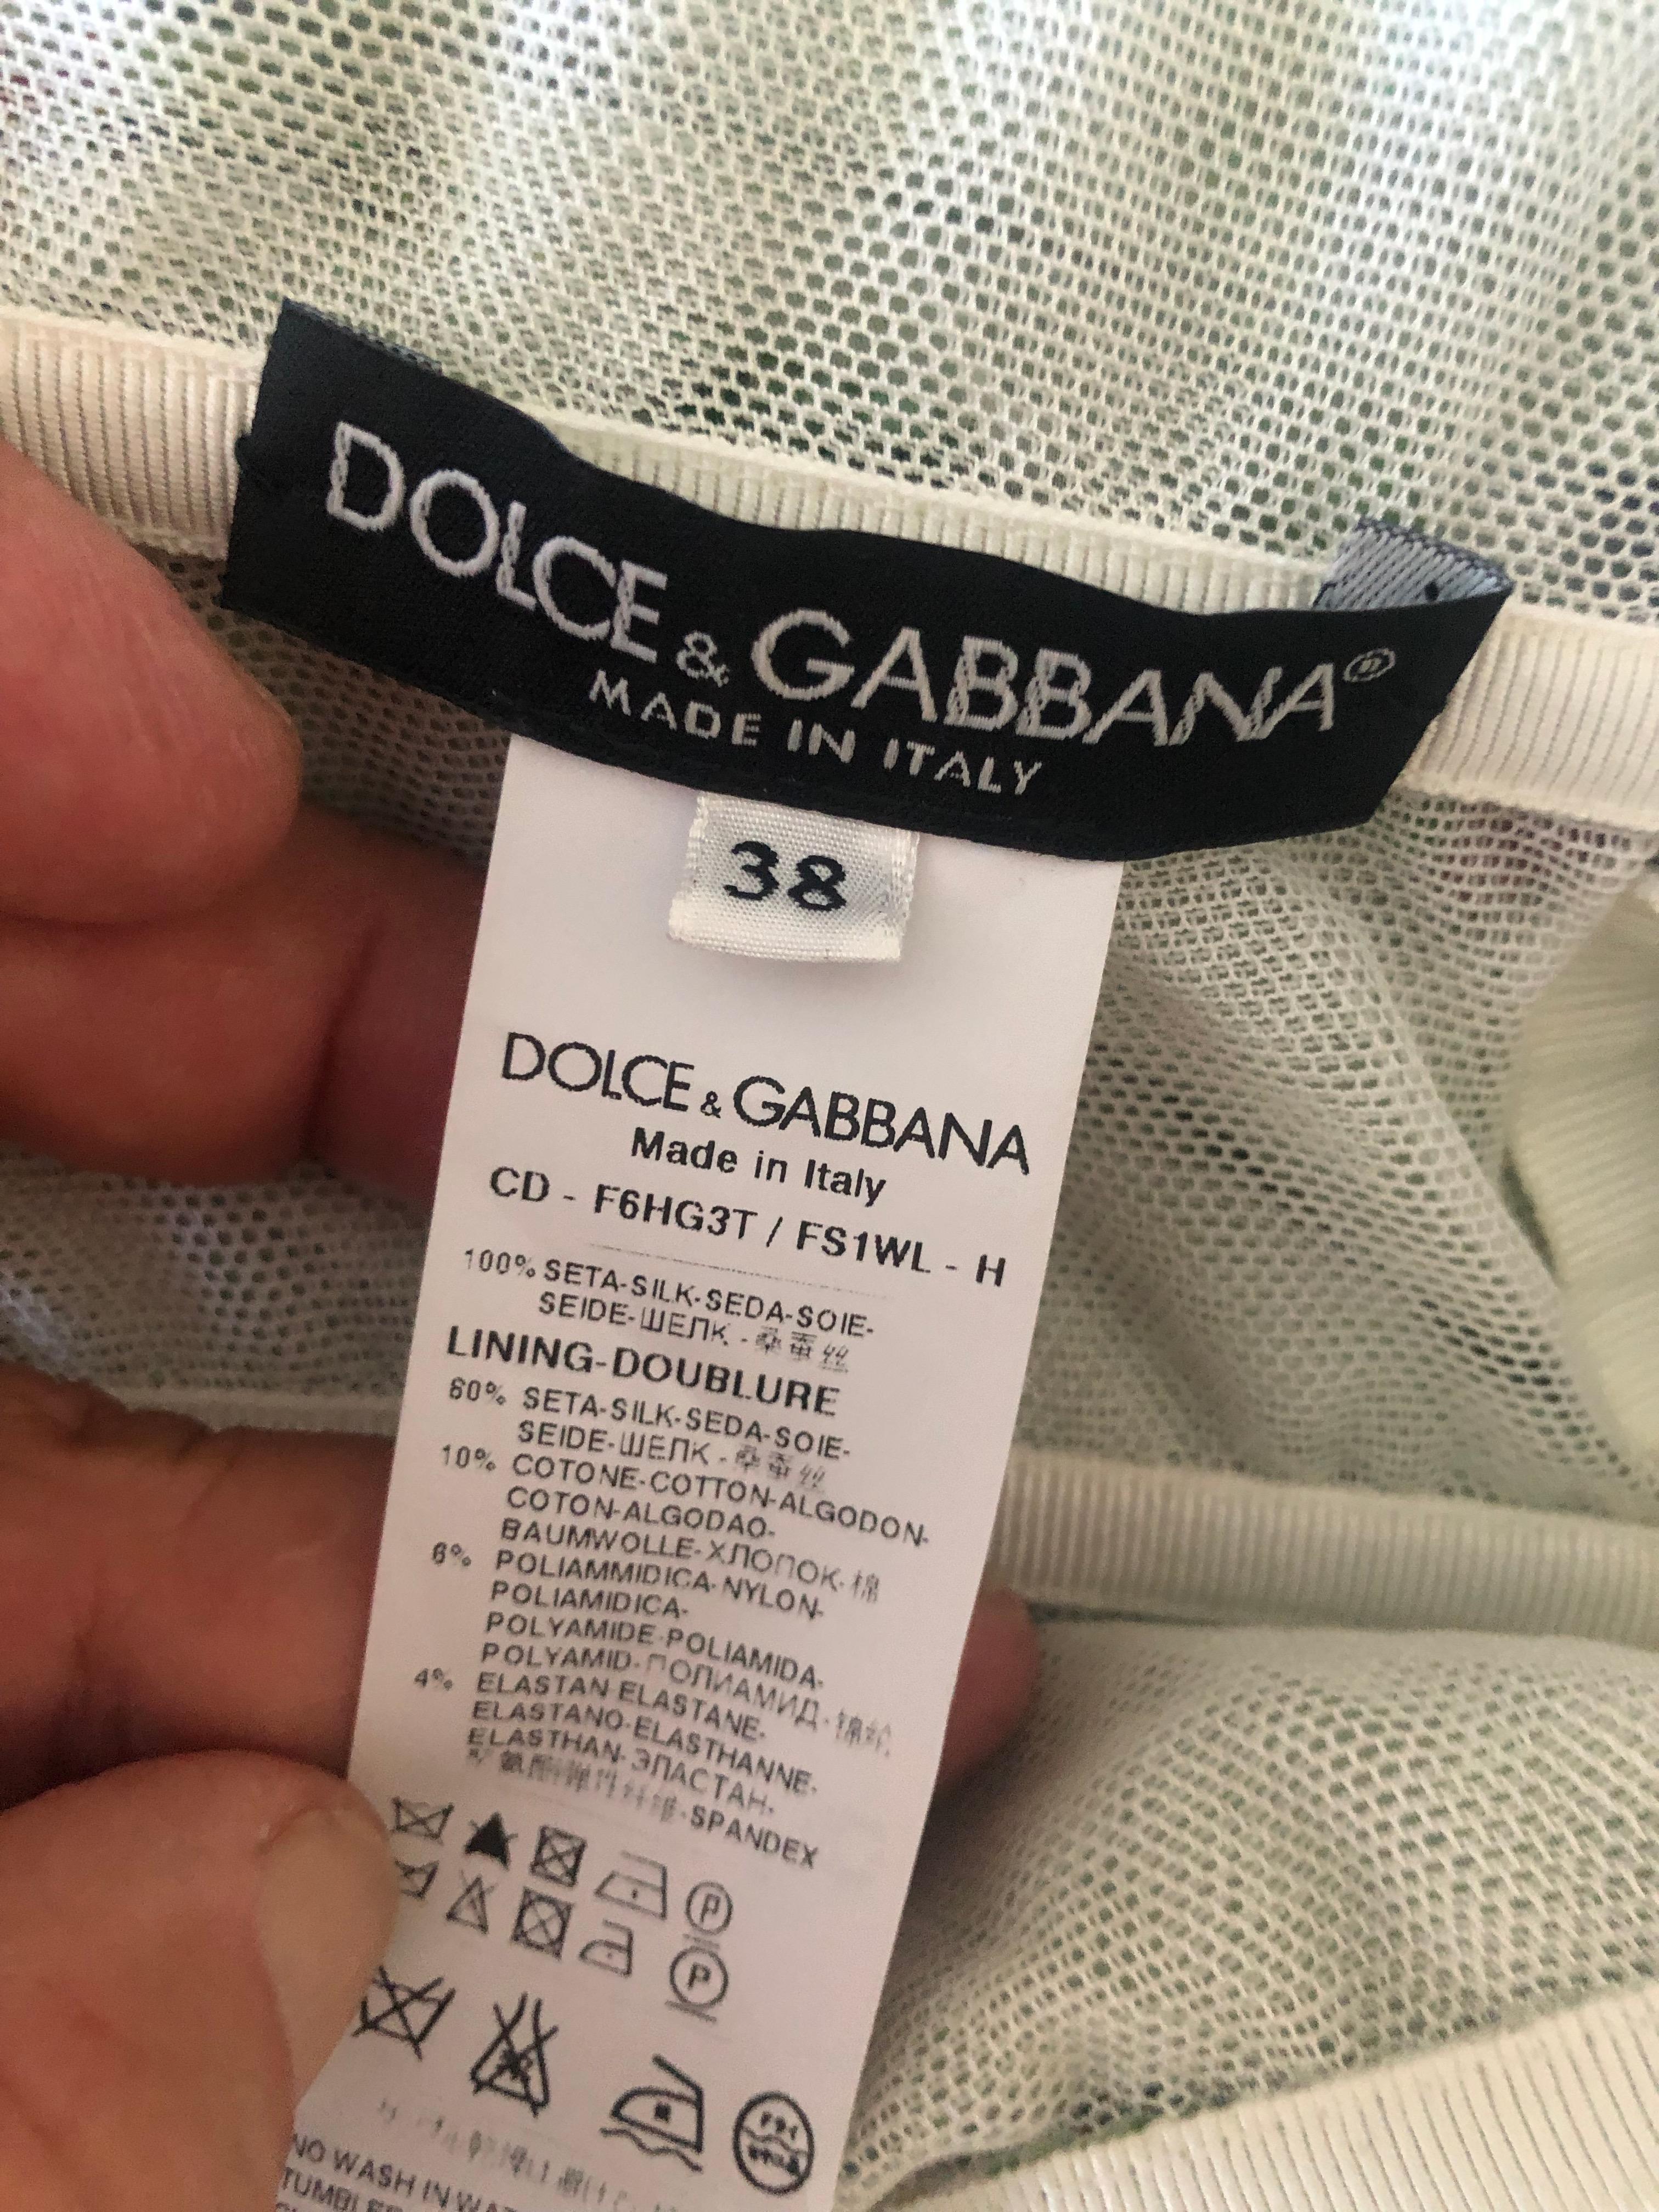 Dolce & Gabbana Vintage Strapless Floral Cocktail Dress with Full Corset and Sash.
 So pretty, there is a full inner corset, and a lot of stretch.
Size 38
 Bust 34